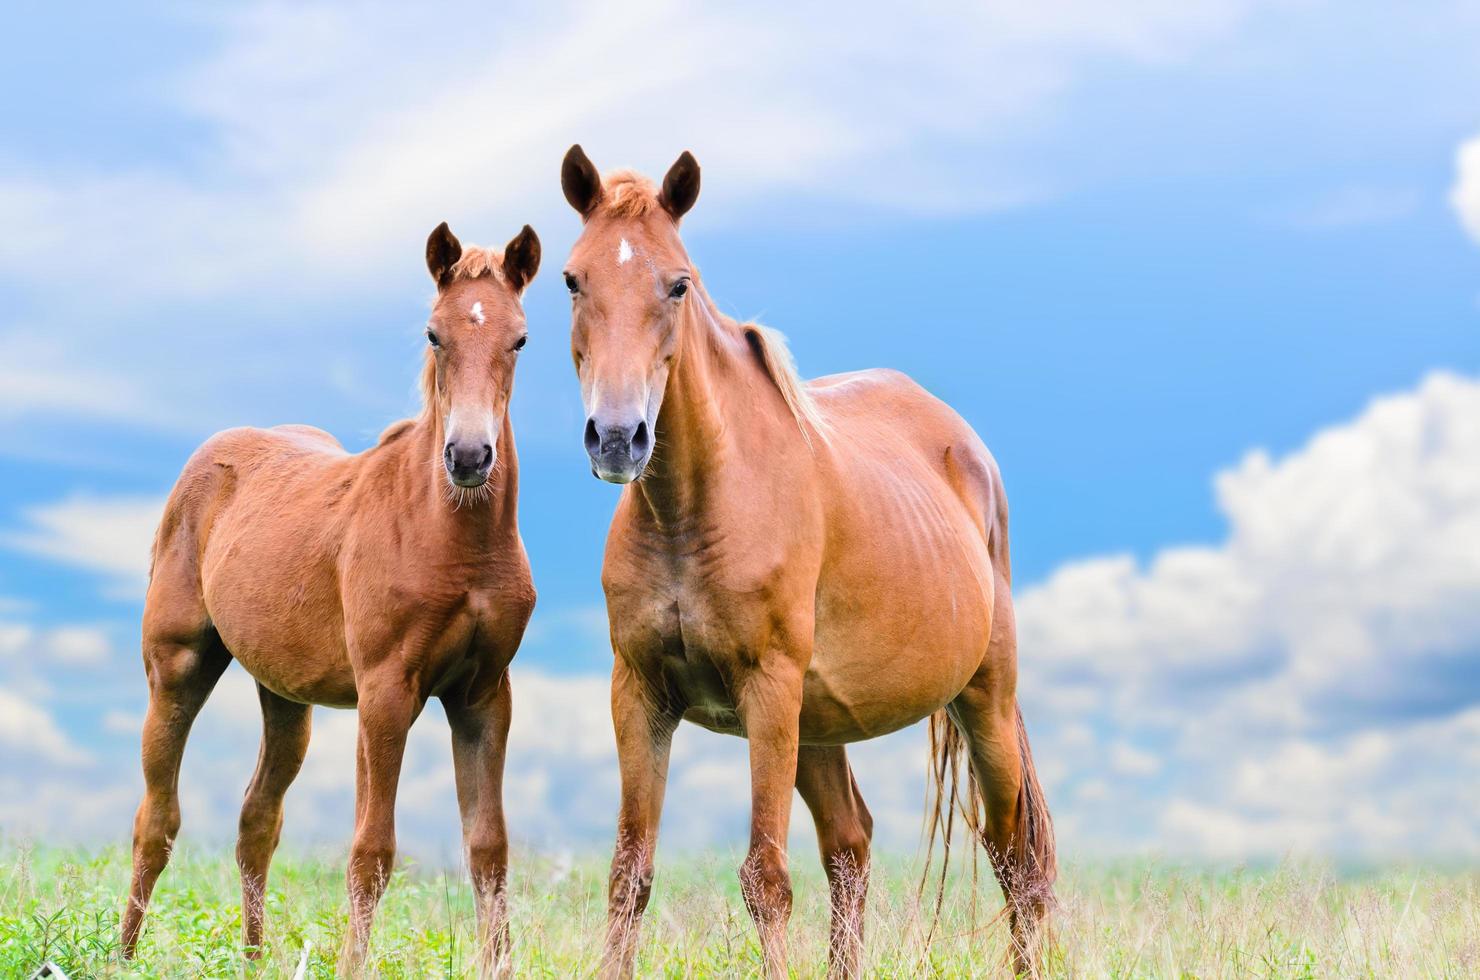 Brown horse and foal looking photo